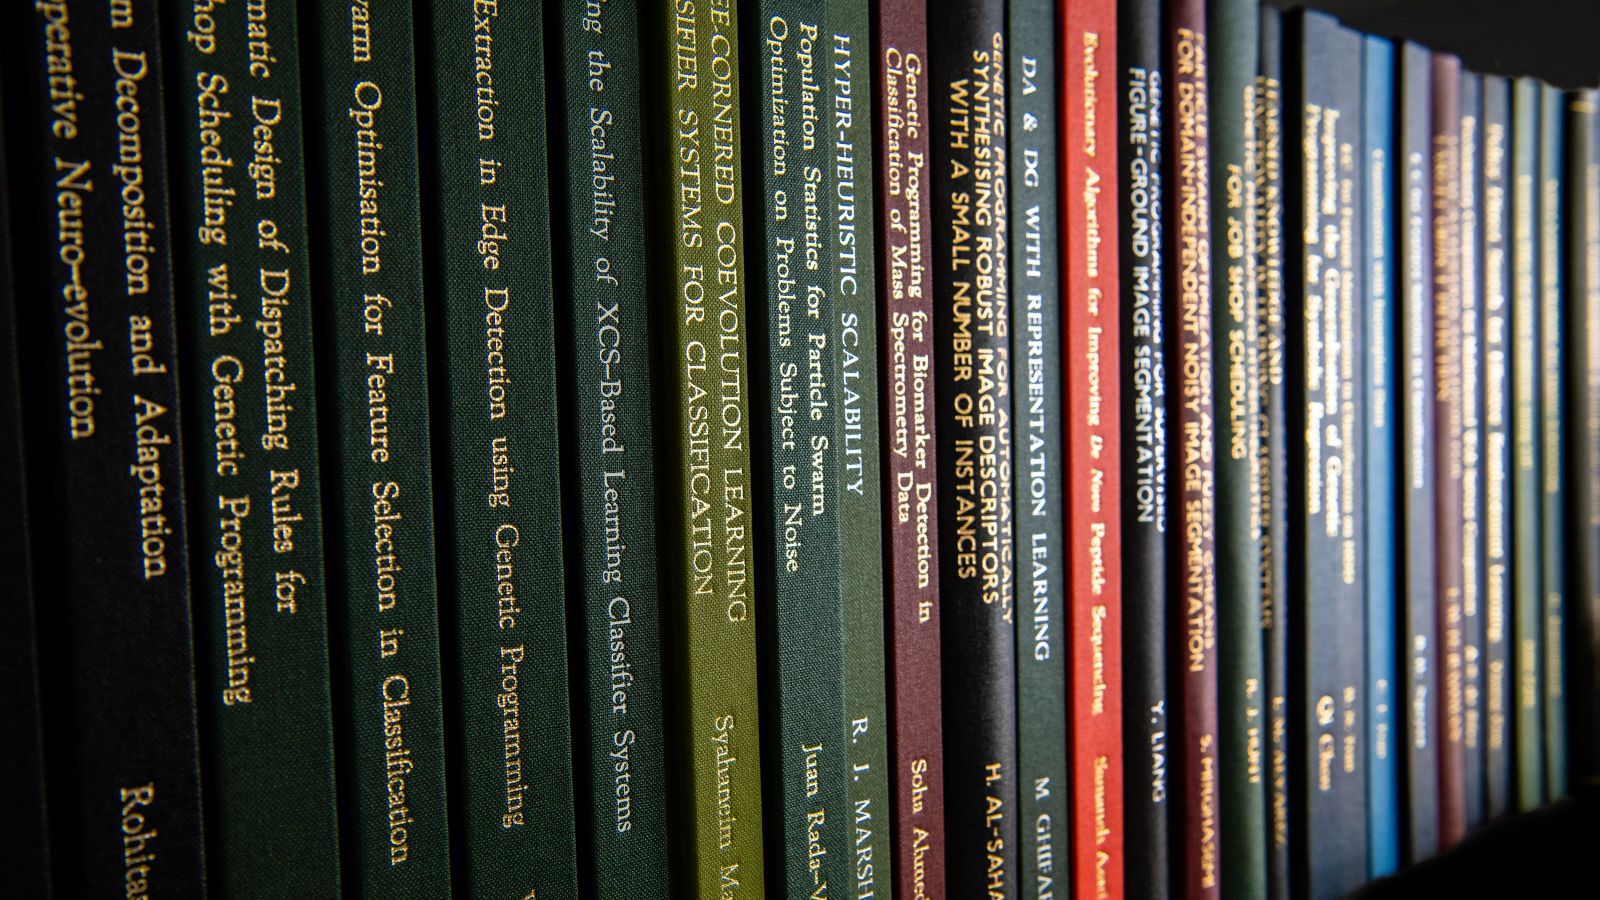 A row of spines of book publications